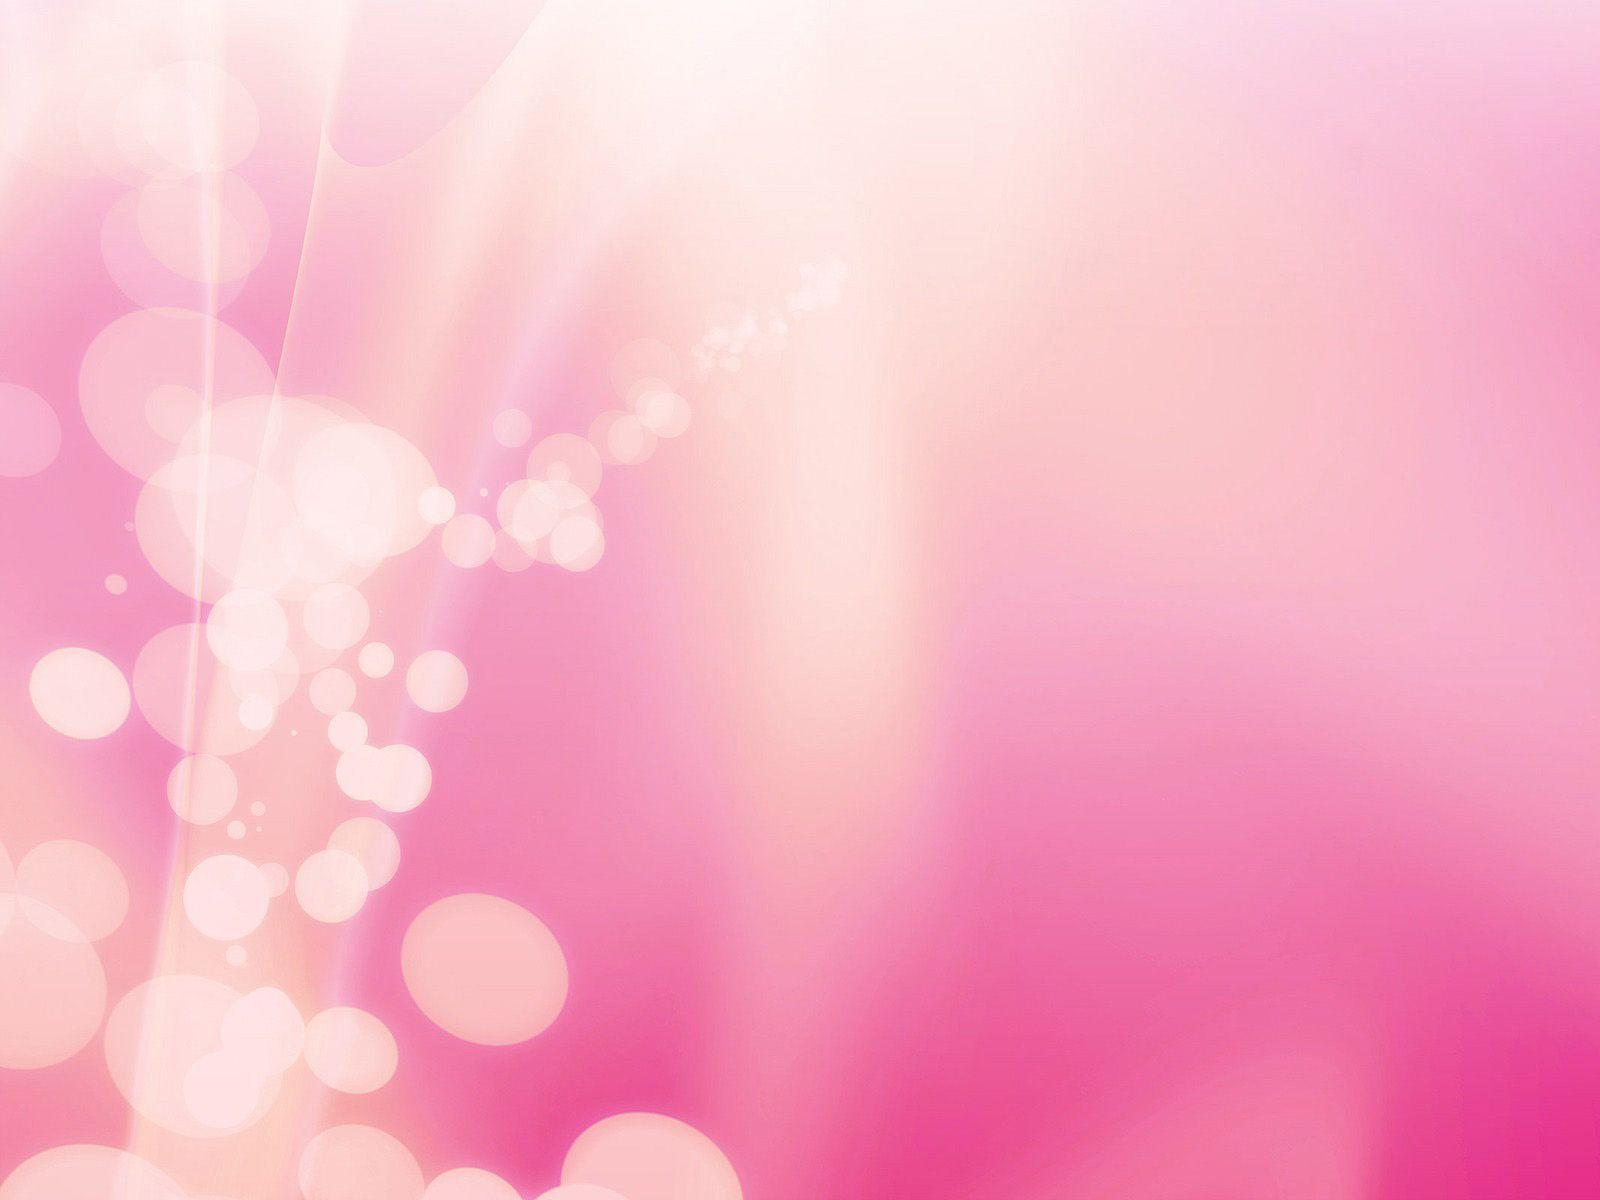 Pink and White Wallpaper 5170 1600x1200 px.com